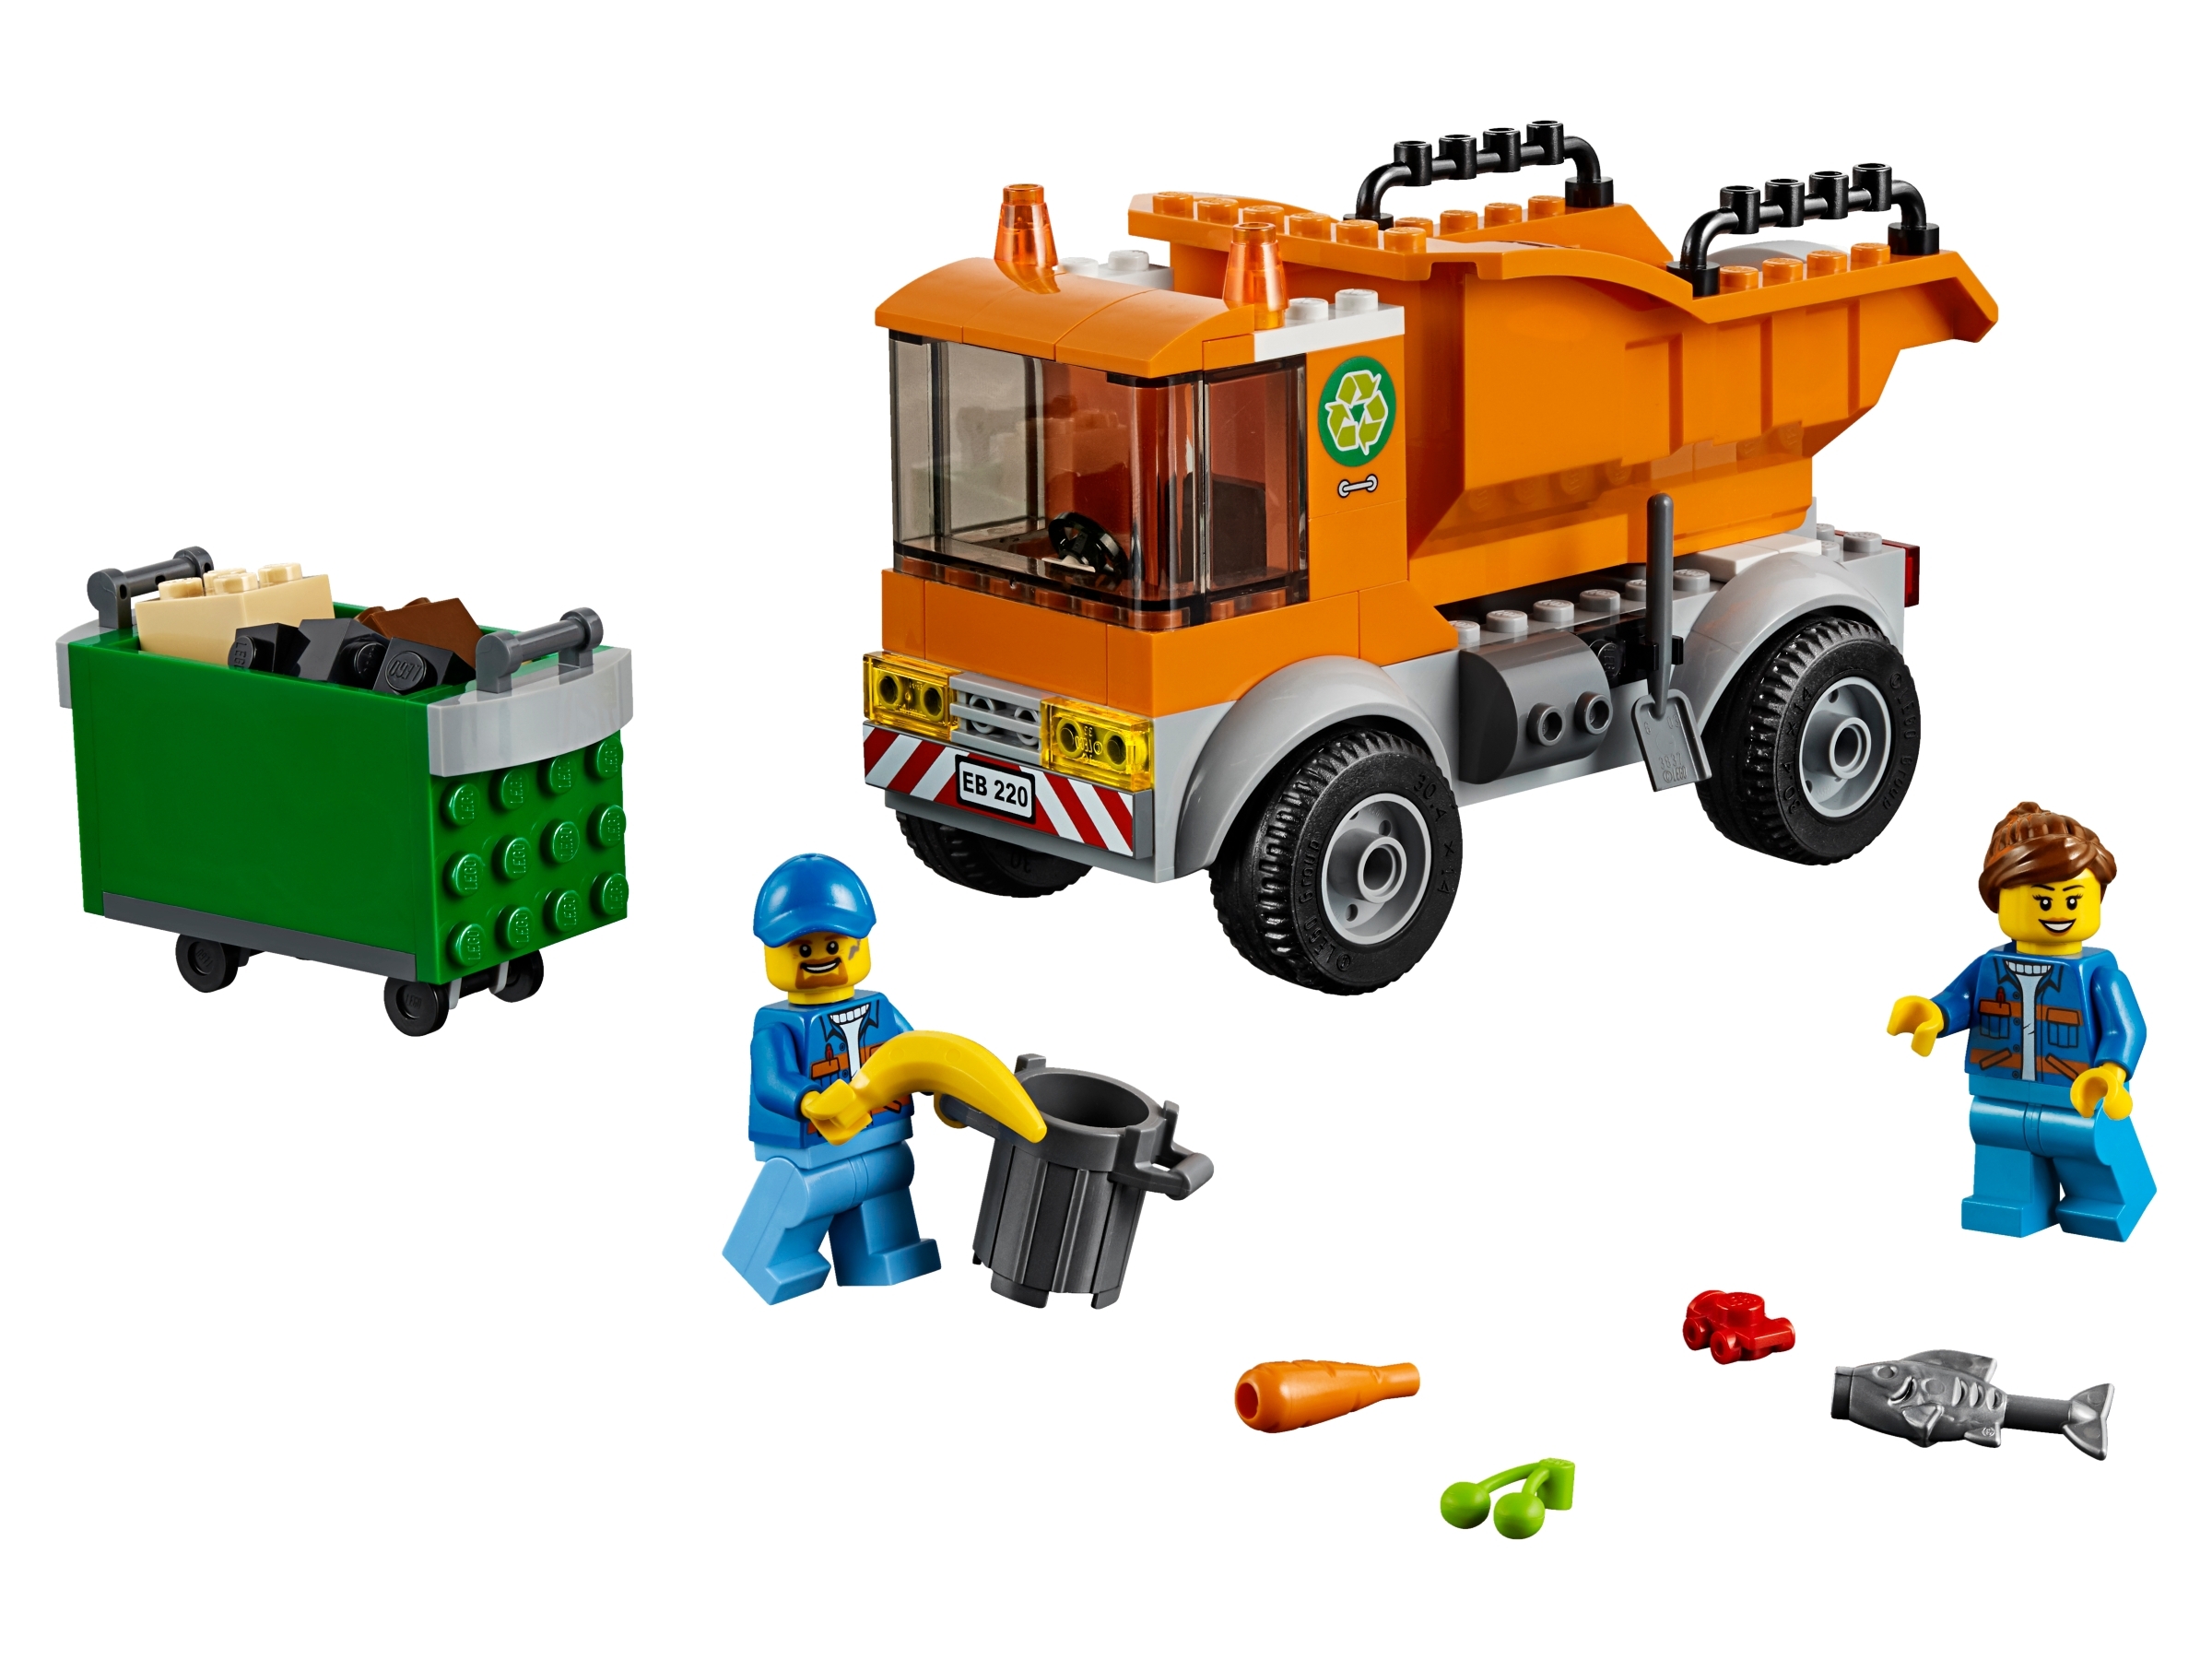 lego recycling truck instructions